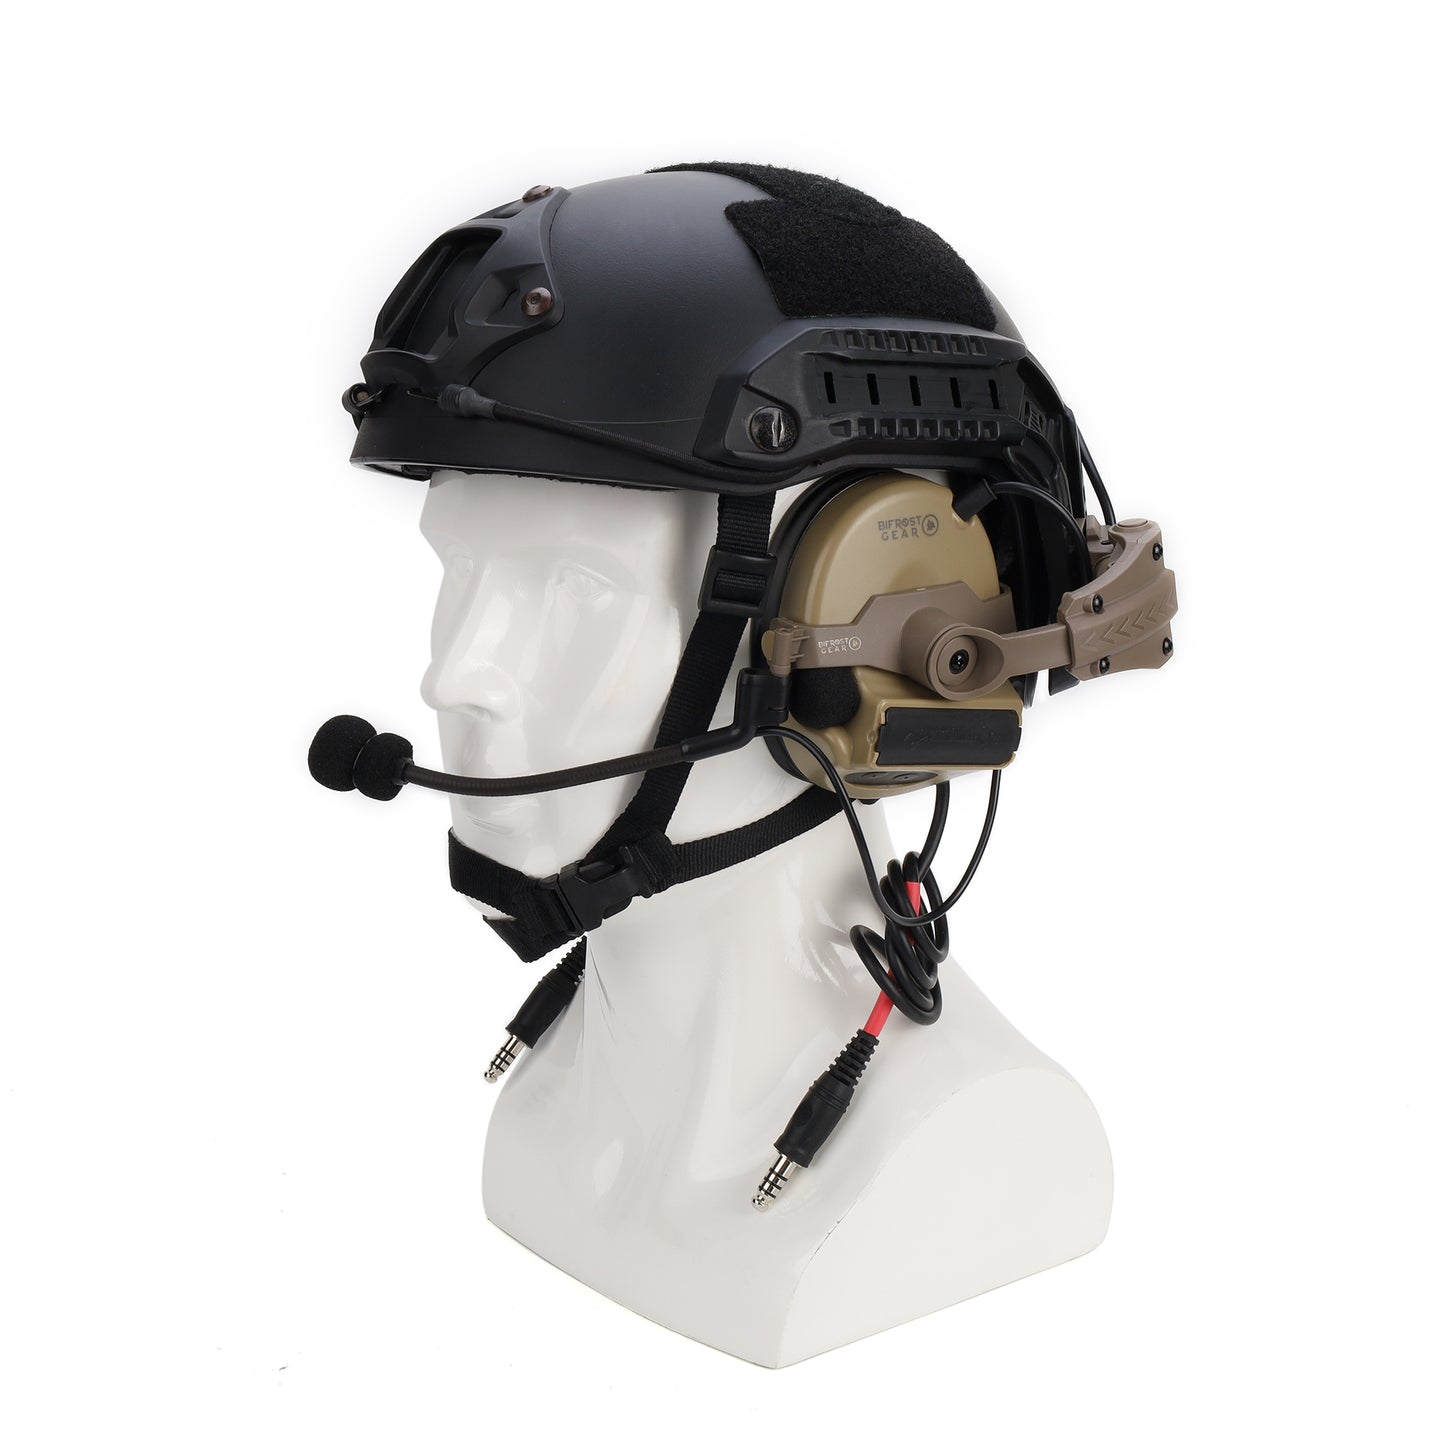 NRR 23db Dual Comm Electronic Hearing Protection Communications Headset with Helmet Rail Adapters